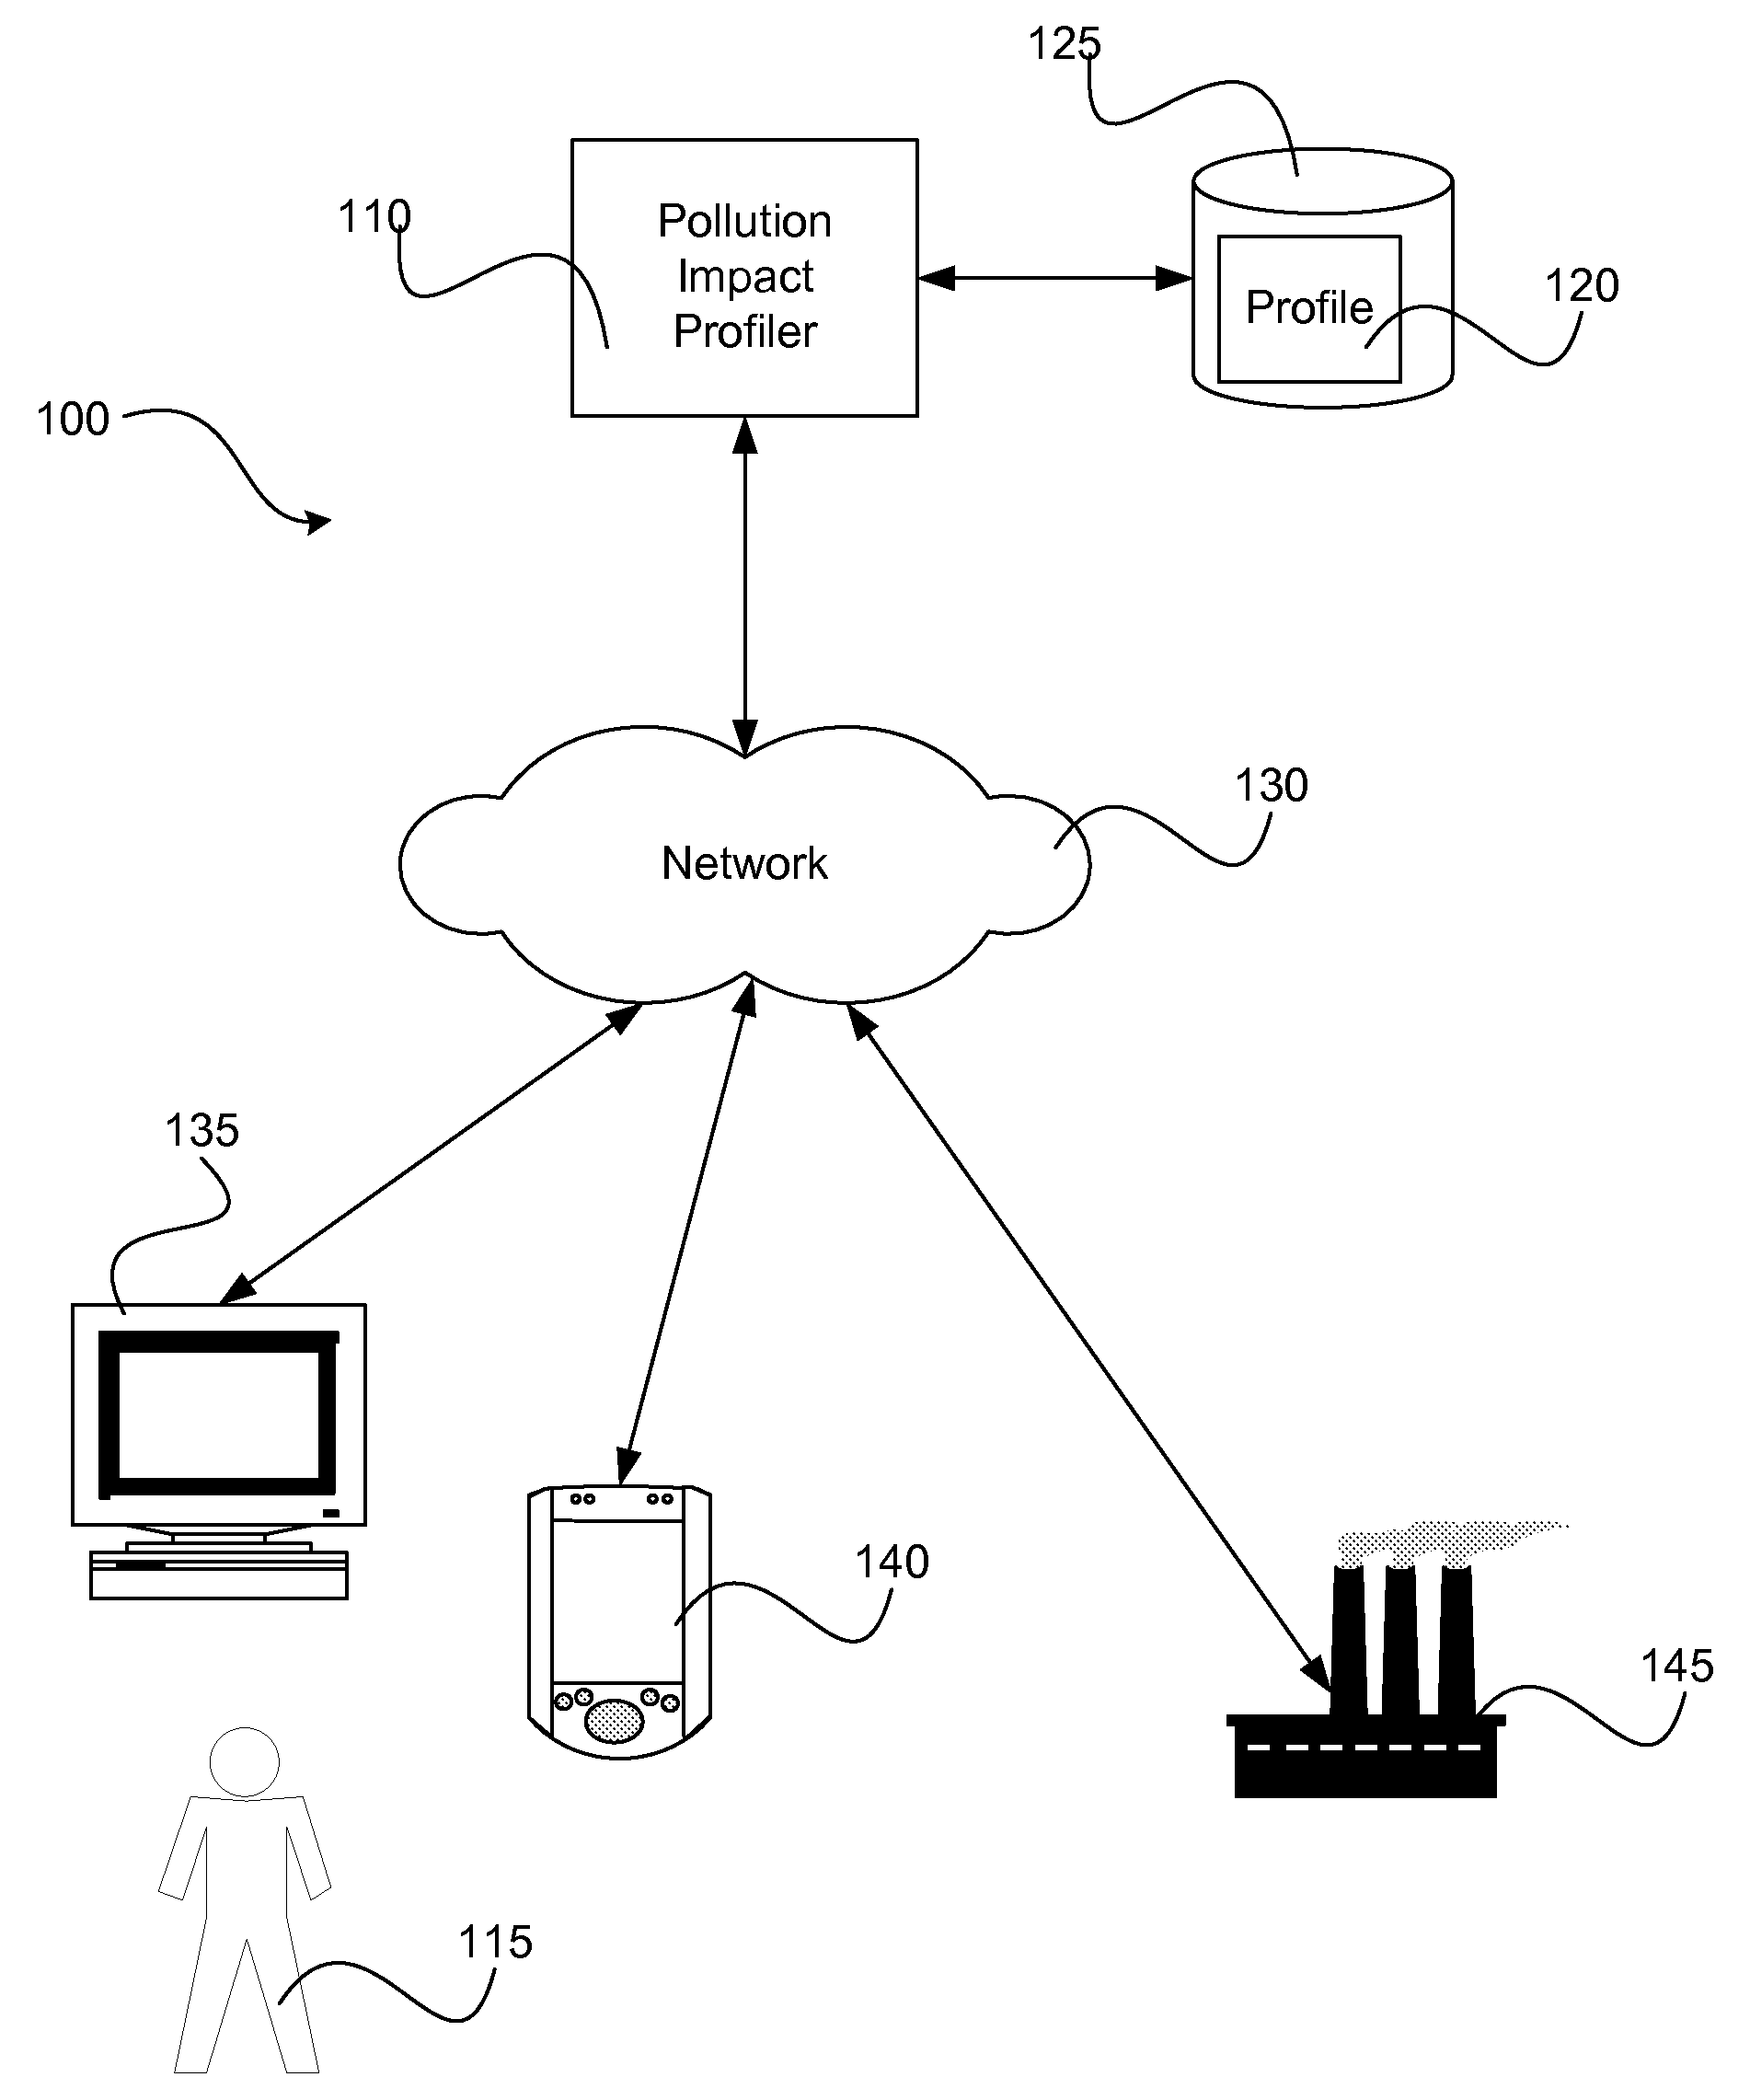 Consumer Pollution Impact Profile System and Method